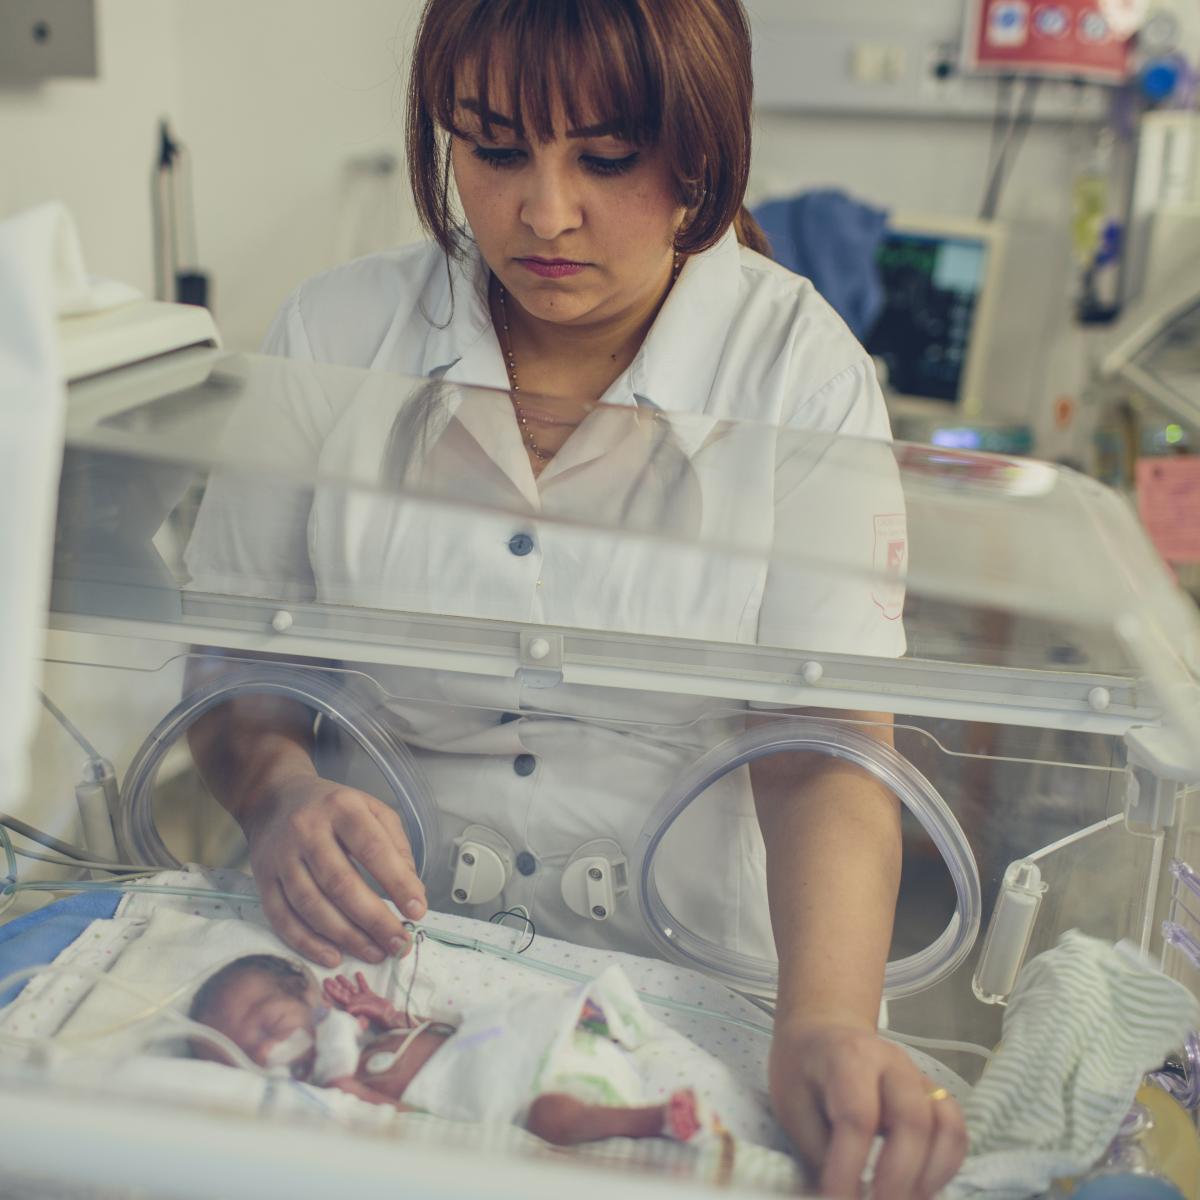 Nurse Rula tends to a baby in the NICU